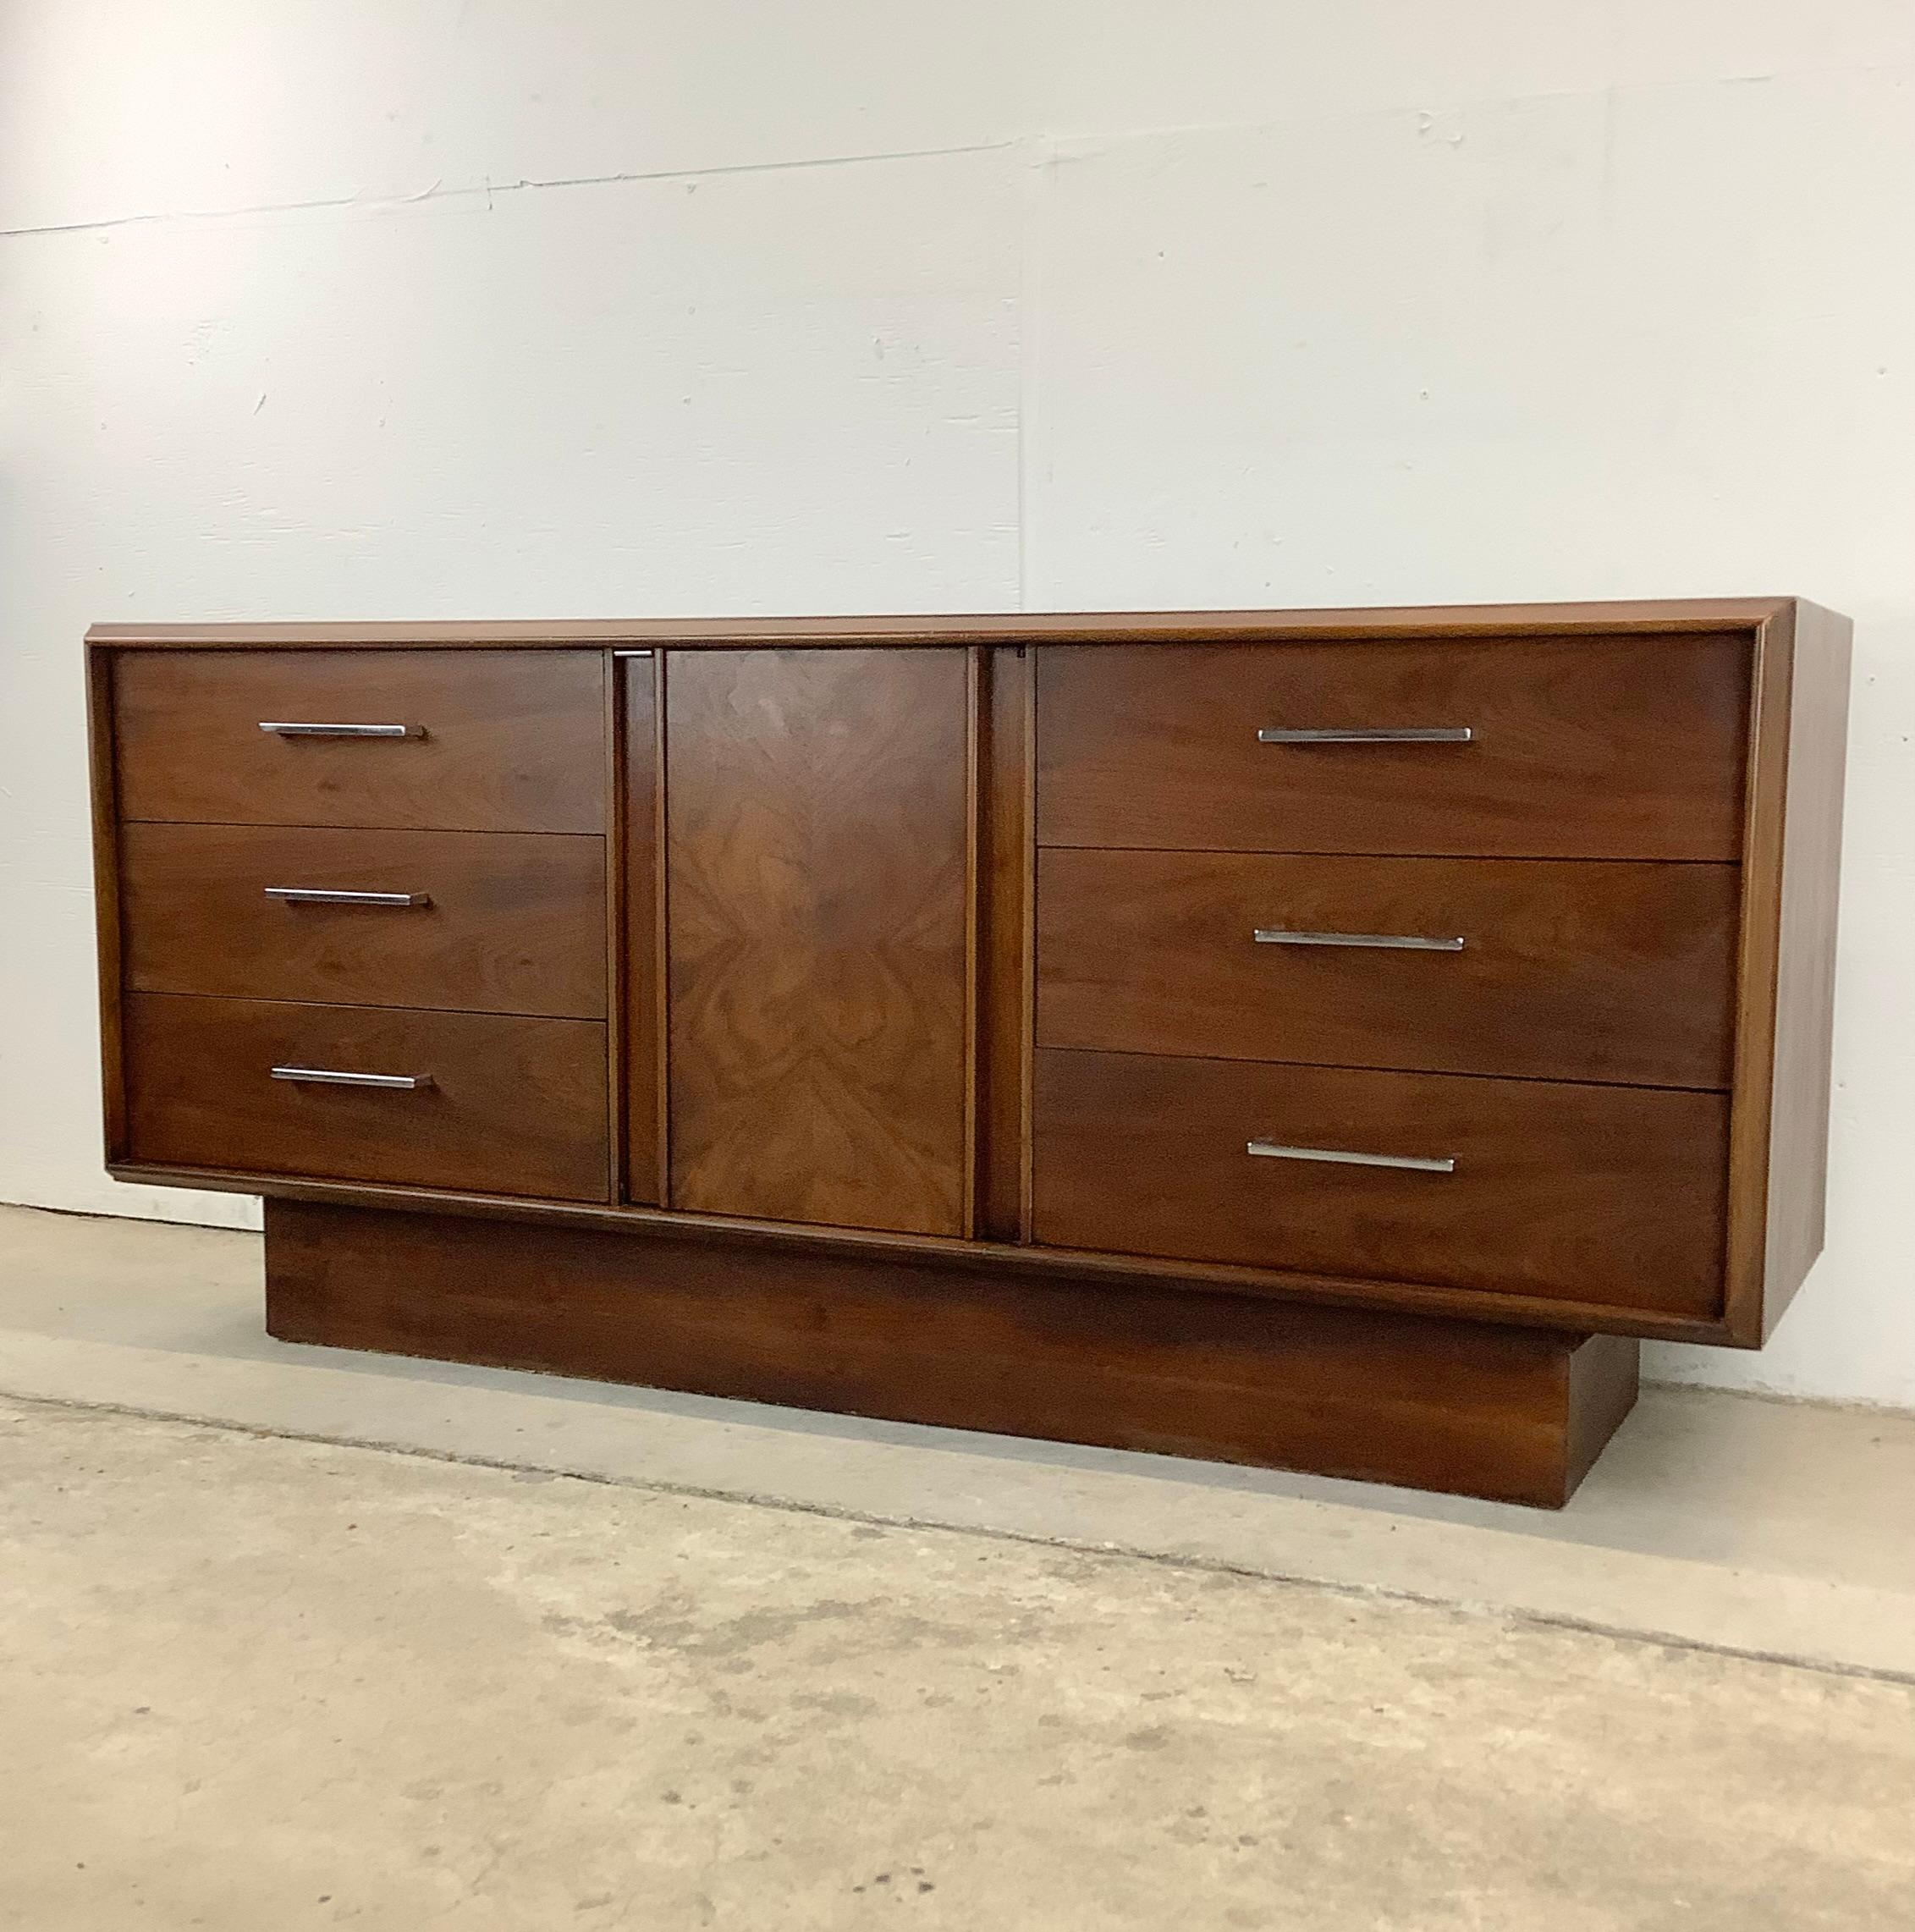 Are you in search of a storage piece that perfectly combines classic design, ample space, and a touch of mid-century charm? Look no further than this Mid-Century Modern Lane Dresser with pedestal base. This vintage gem offers both style and storage